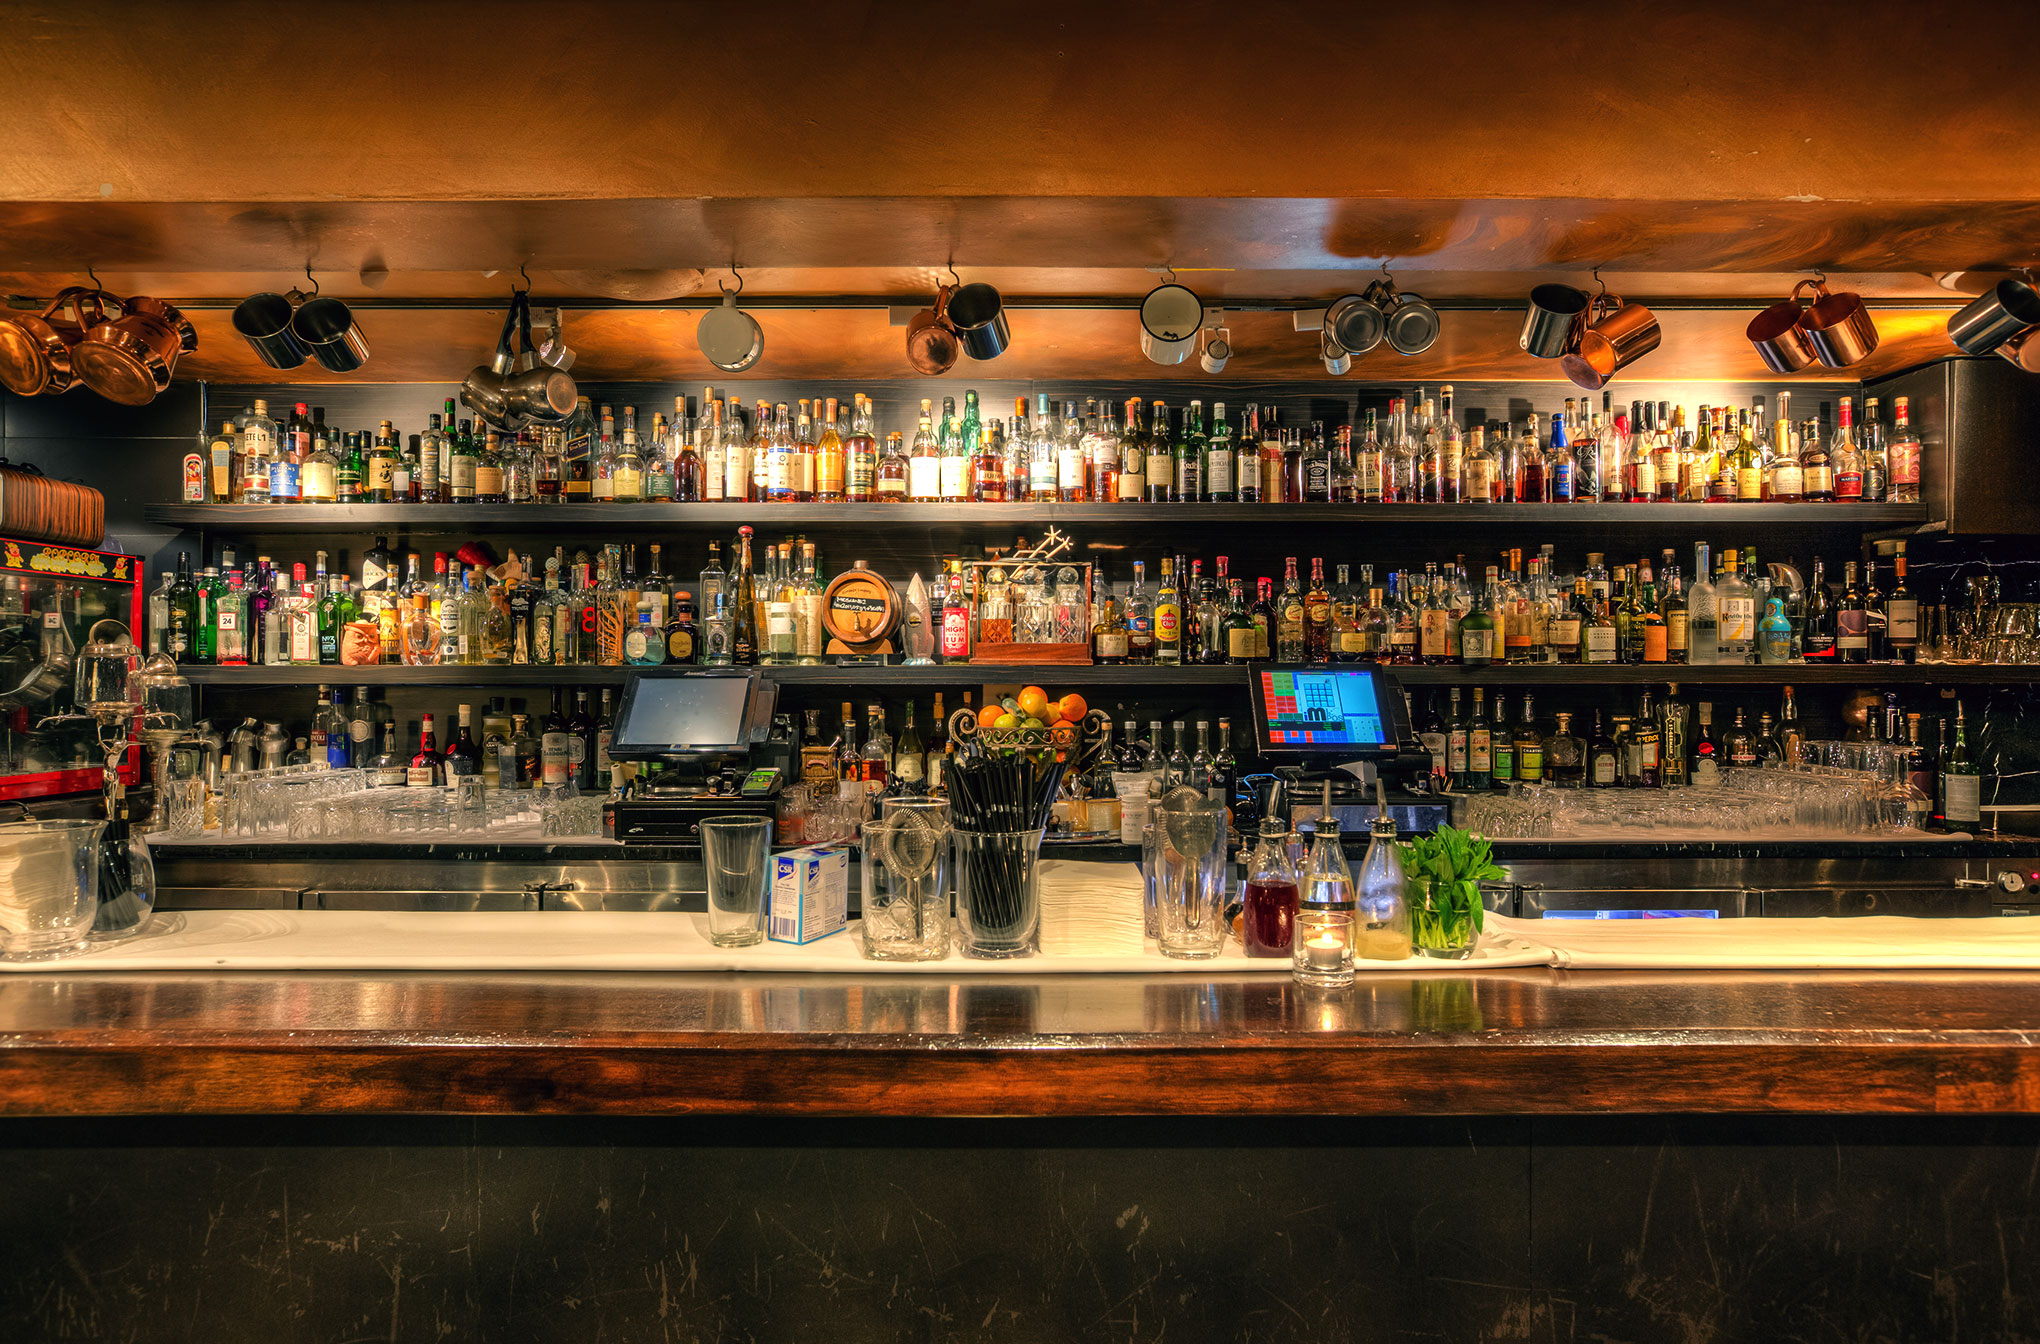 A view of the bar and shelves of alcohol bottles behind it at Eau de Vie on Darlinghurst Road in Kings Cross, Sydney.